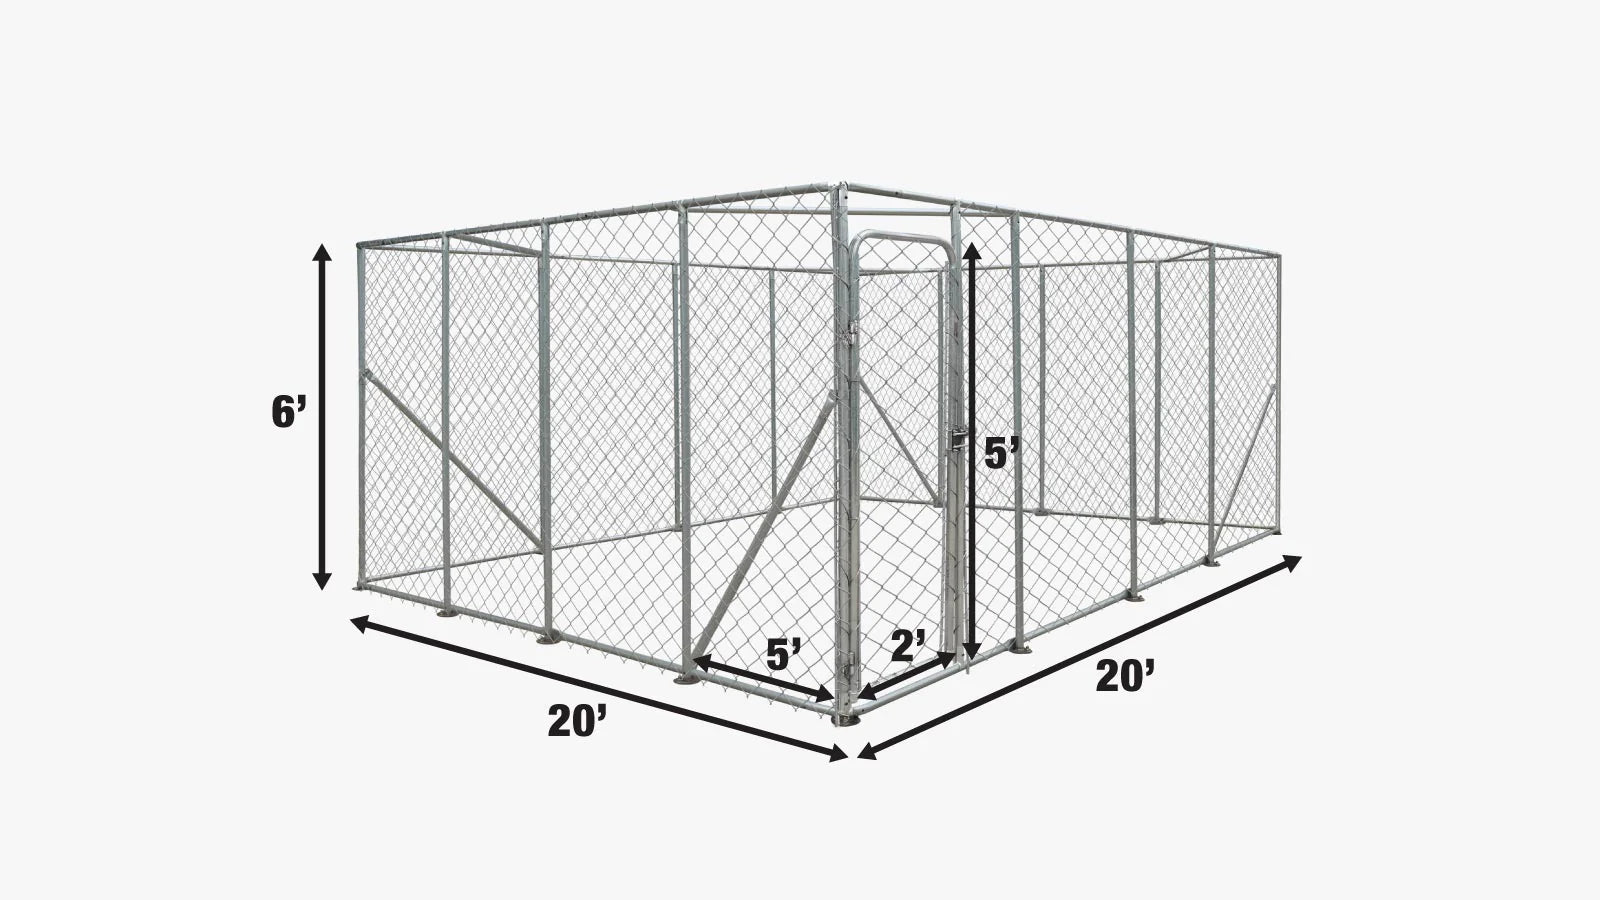 TMG Industrial 20’ x 20’ Outdoor Dog Kennel Playpen, Outdoor Dog Runner, Pet Exercise House, Lockable Gate, 6’ Chain-Link Fence, TMG-DCP2020-specifications-image